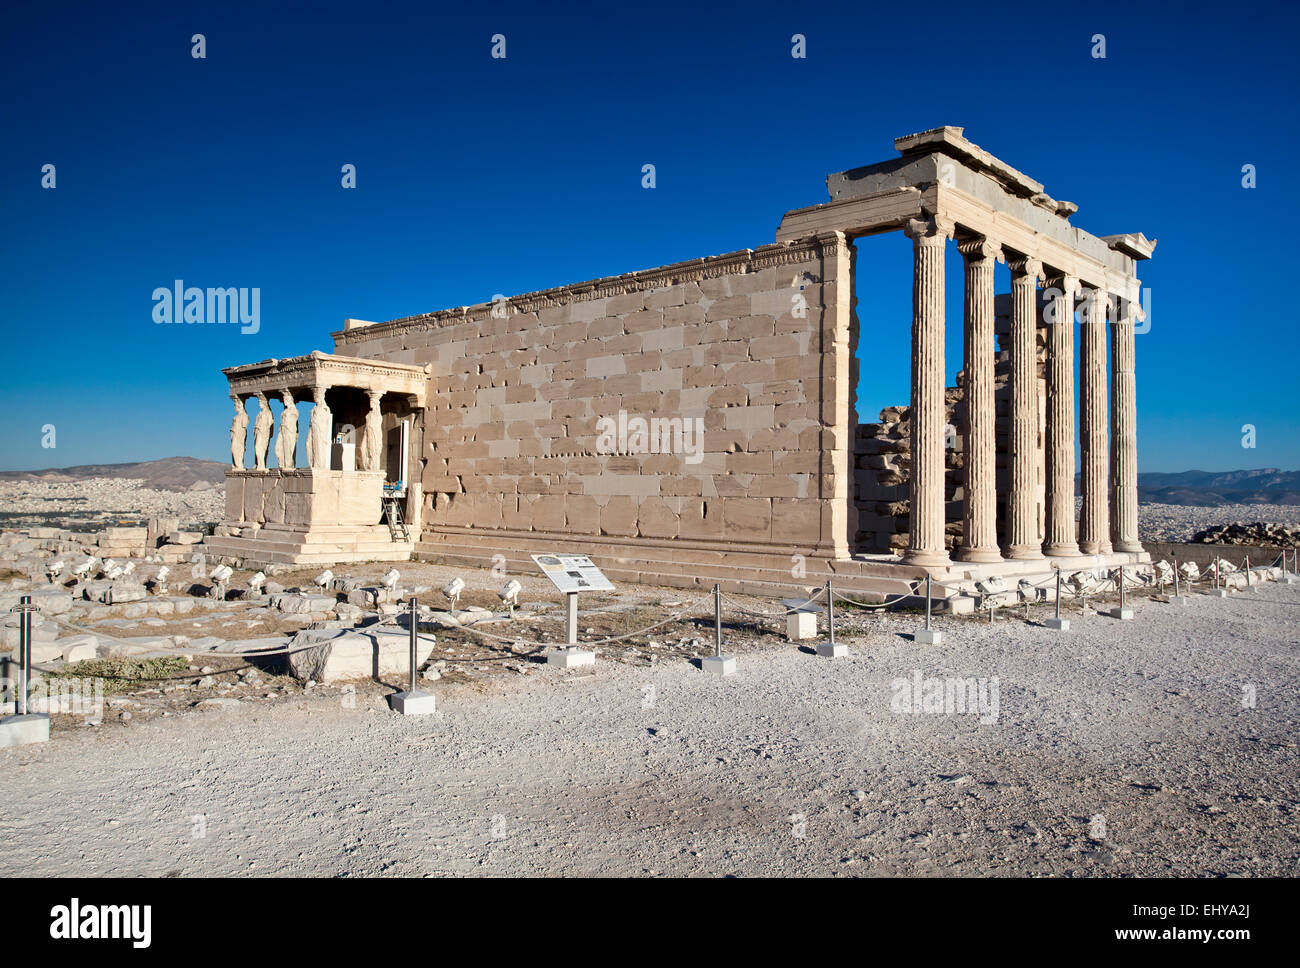 The Erechtheion ancient Greek temple on the north side of the Acropolis of Athens in Greece. Stock Photo